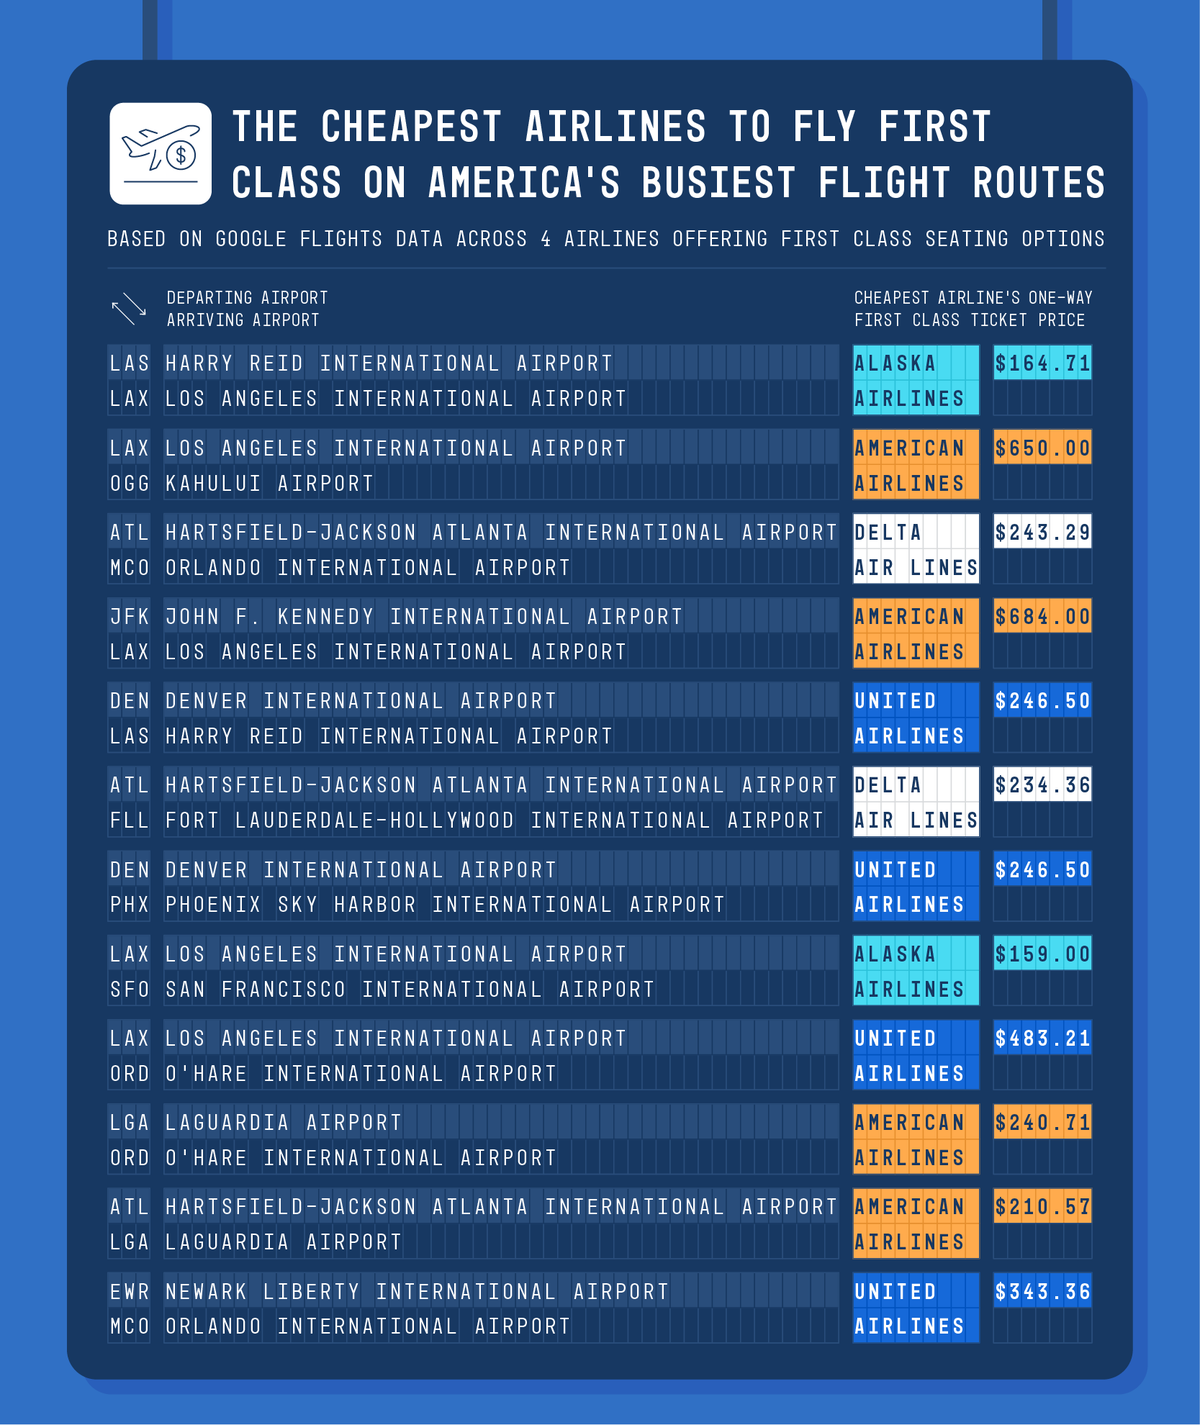 Table showing the cheapest airline for first class tickets across the busiest U.S. routes